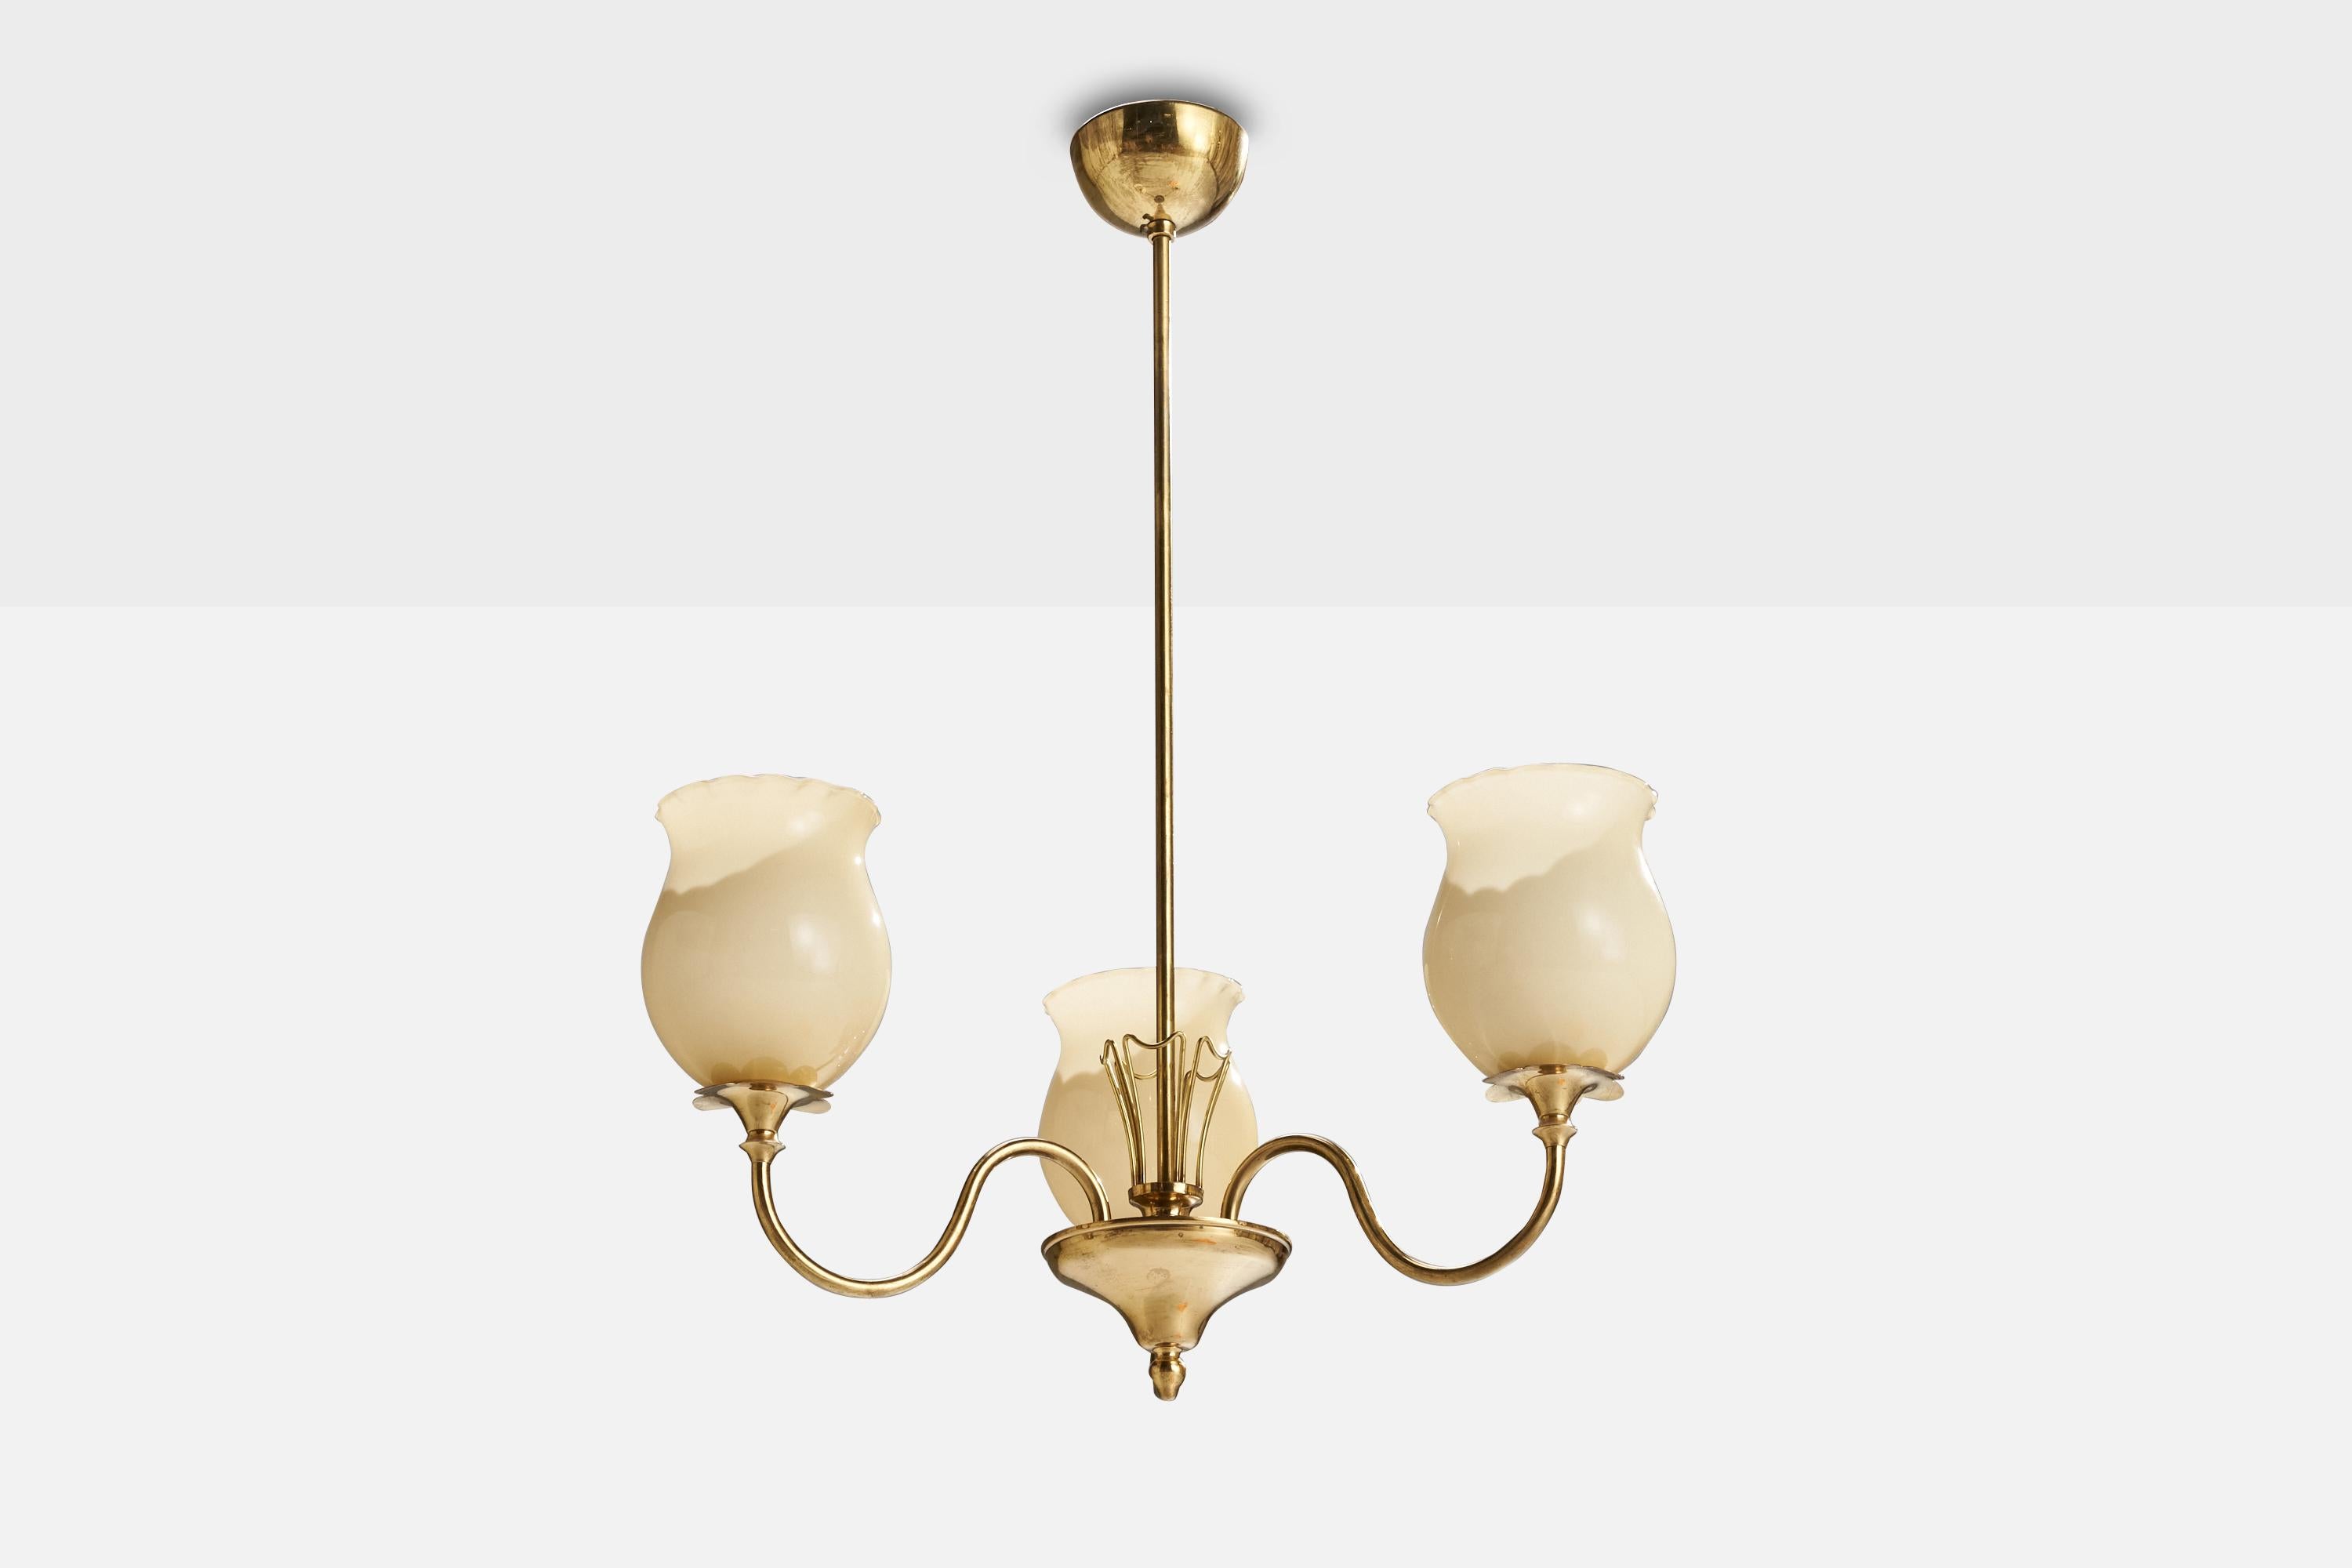 A brass and opaline glass chandelier produced by Idman, Finland, c. 1940s.

Dimensions of canopy (inches): 3.92” H x 2.60” Diameter
Socket takes standard E-26 bulbs. 3 socket.There is no maximum wattage stated on the fixture. All lighting will be